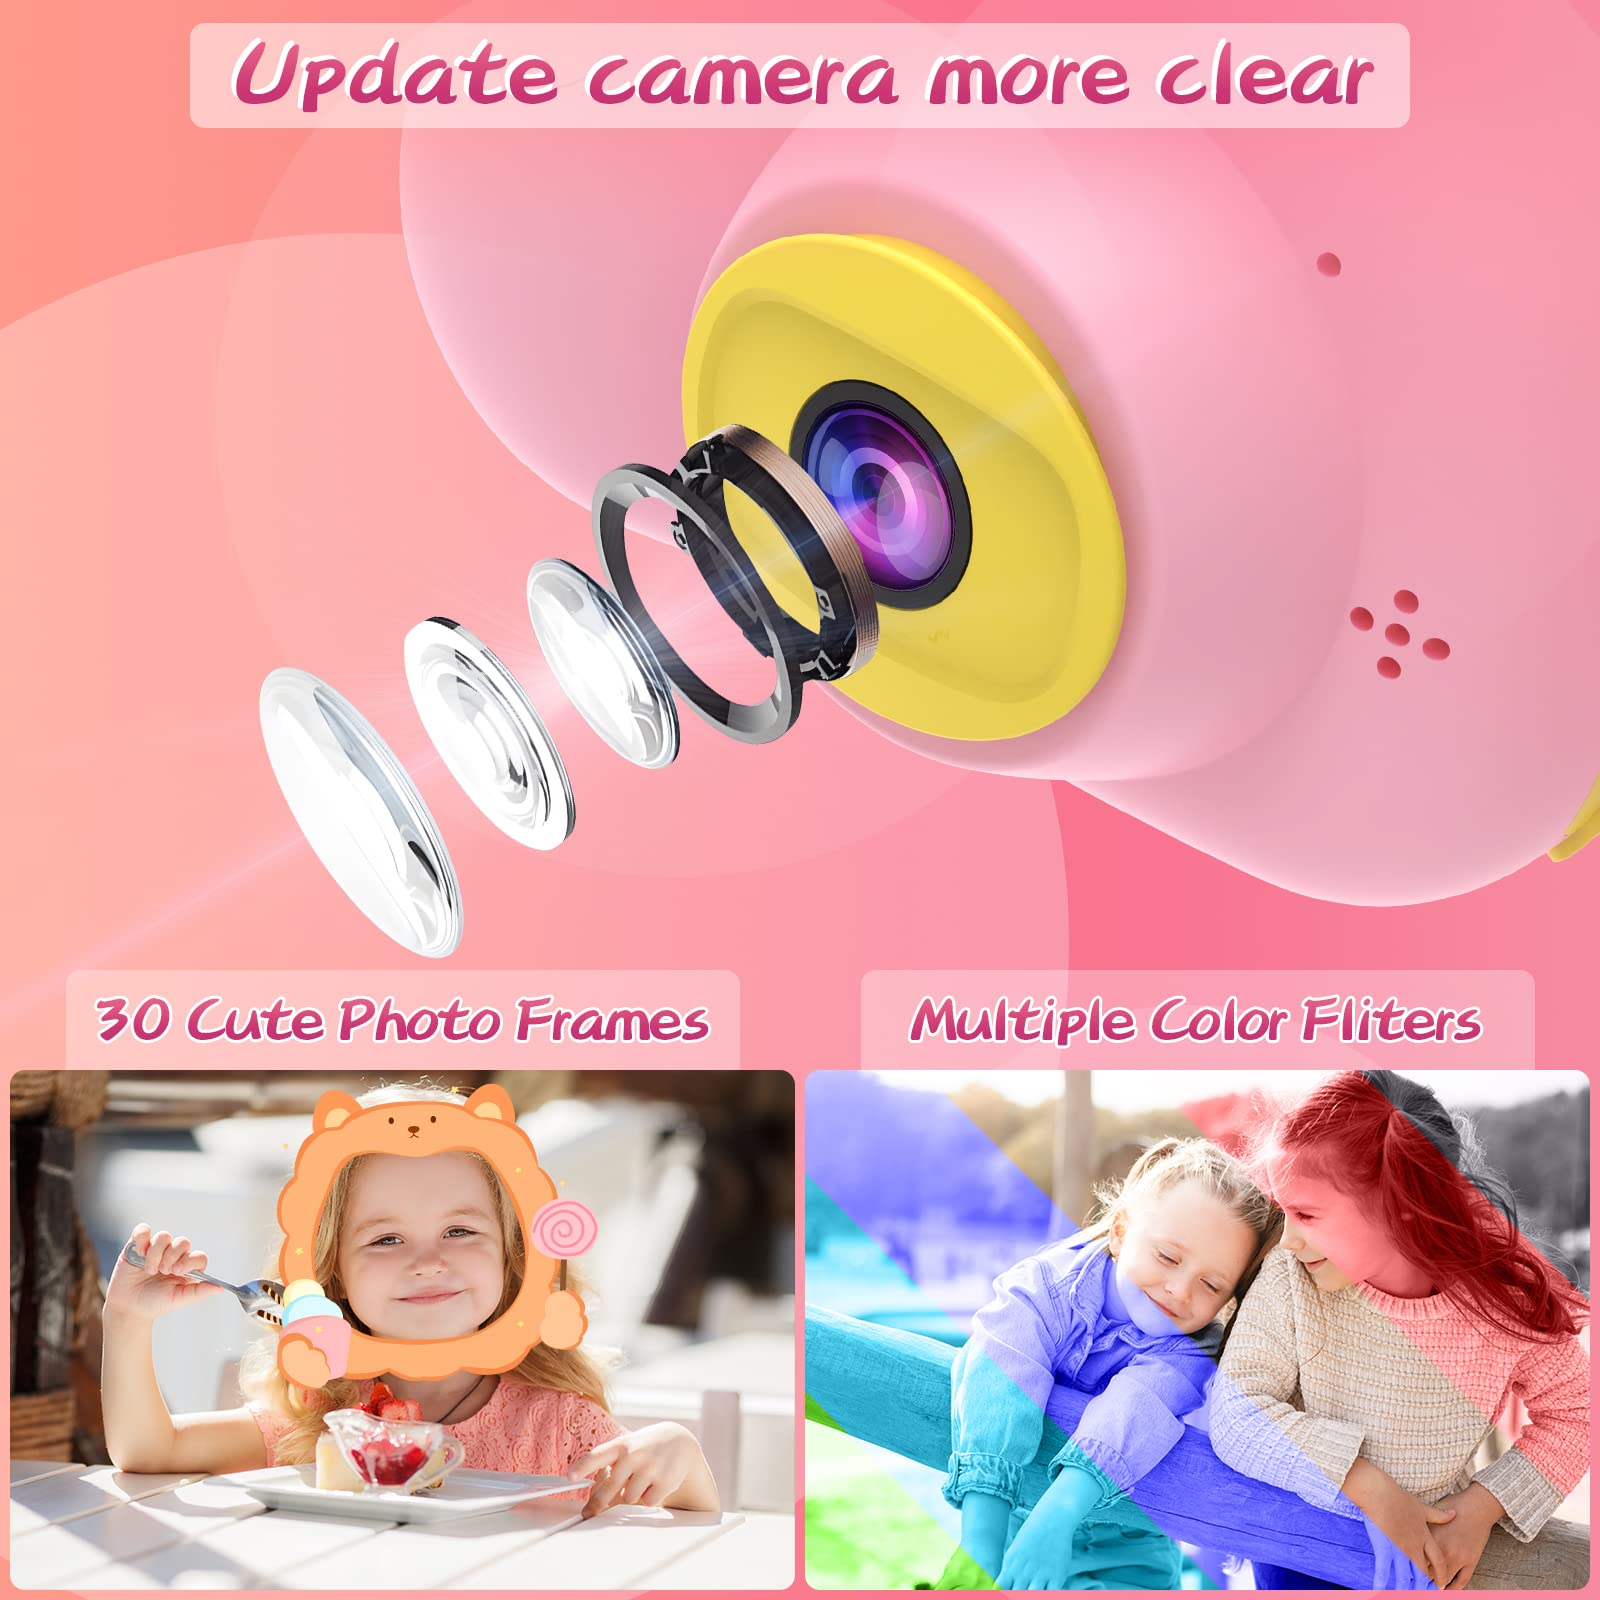 OMZER Kids Camera 1080P Selfie Mini Camera, HD Digital Video Camera for Toddlers, Video Recorder Toys for Kids, Christmas Birthday Gifts for Age 3 4 5 6 7 8 9 10 Year Old Girls Boys with 32G SD Card